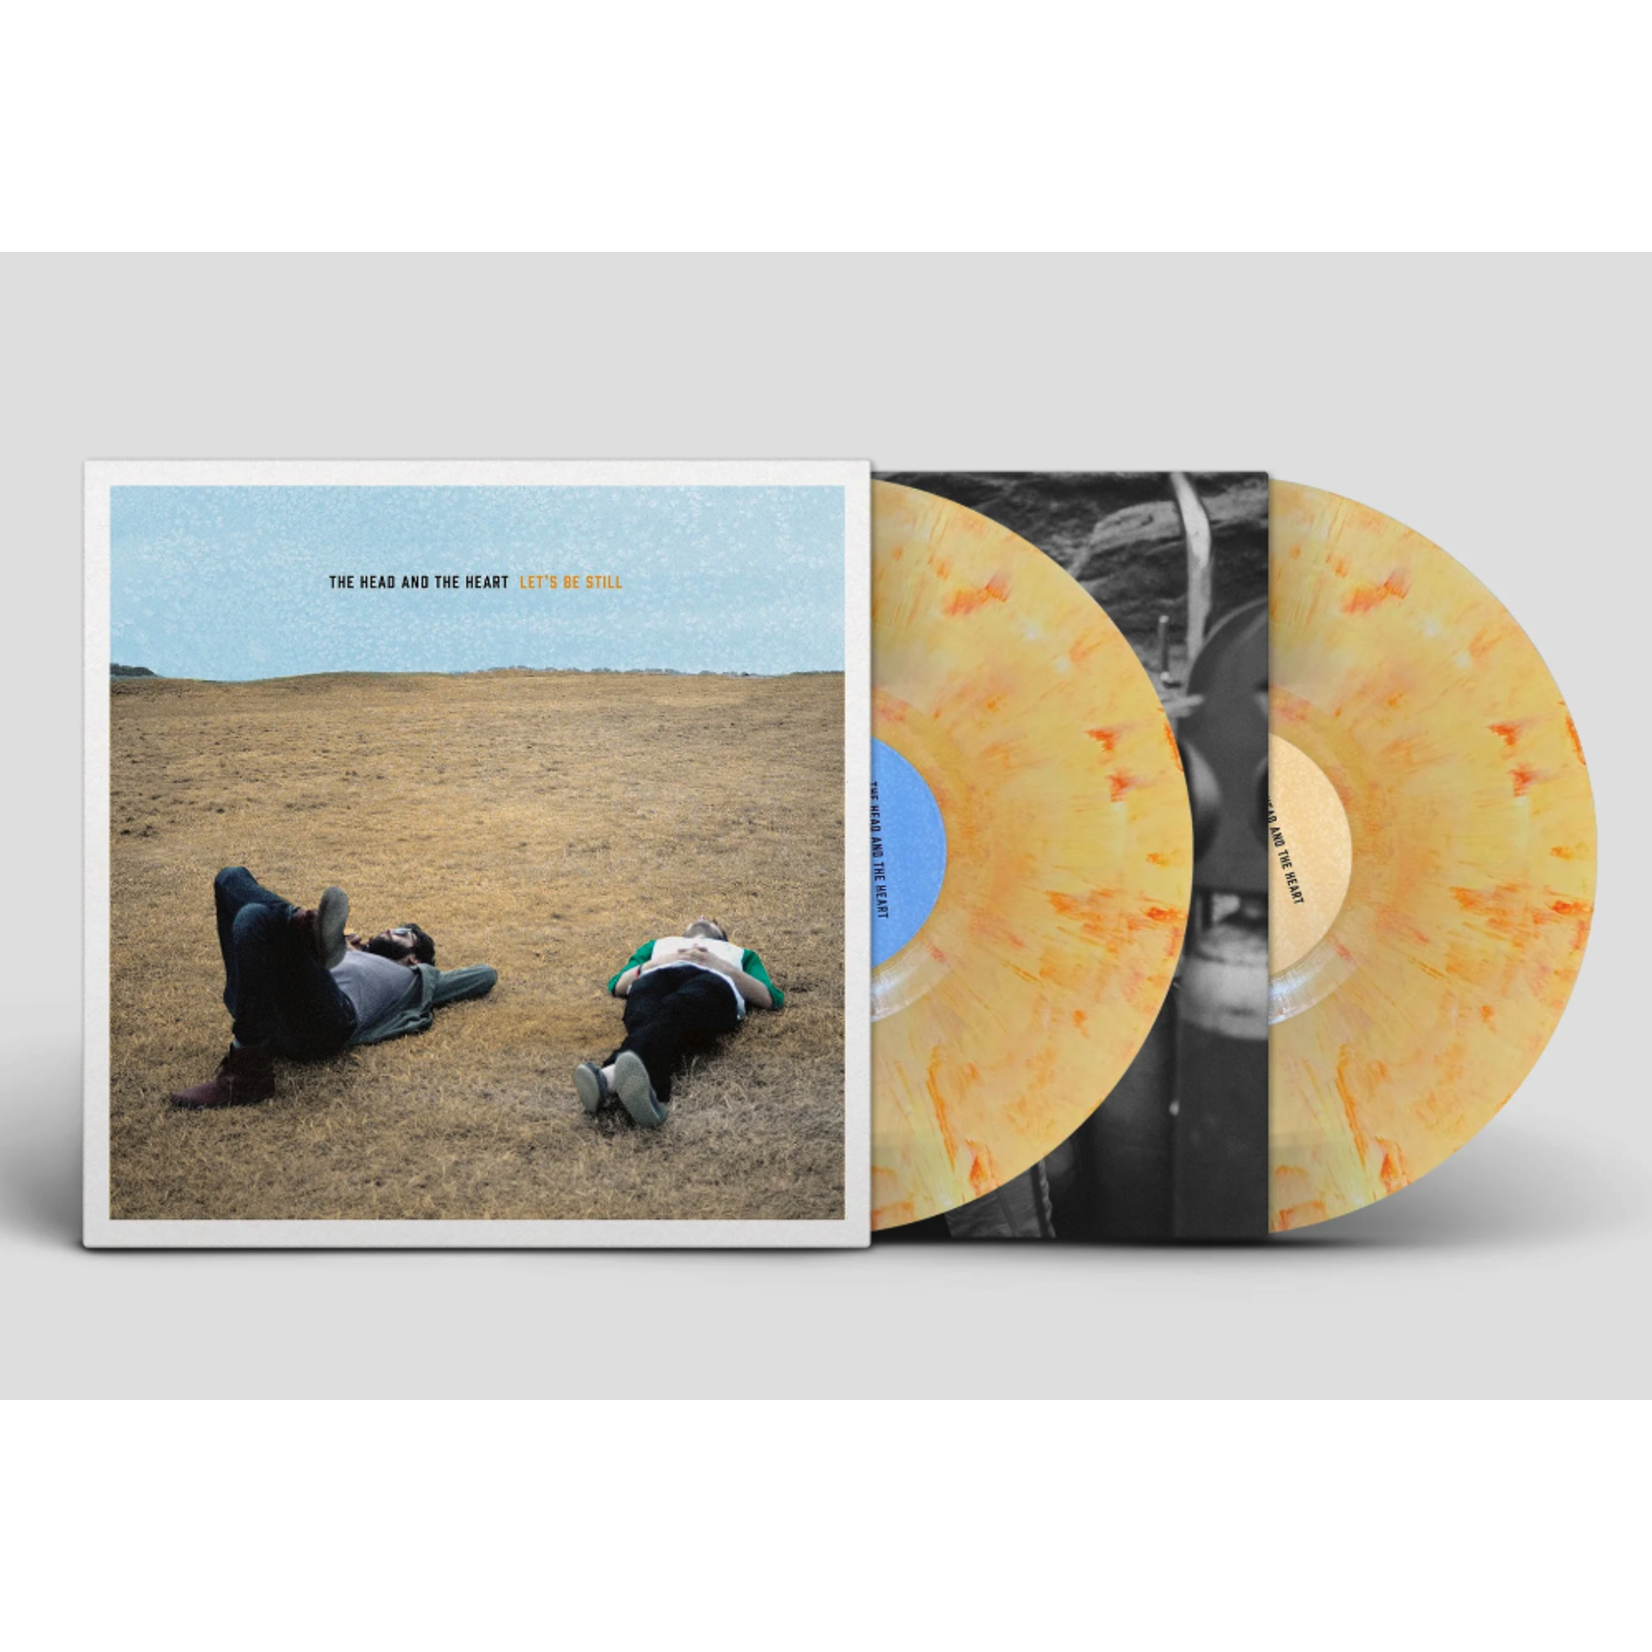 Sub Pop Head & The Heart - Let's Be Still (2LP) [Yellow Marble]